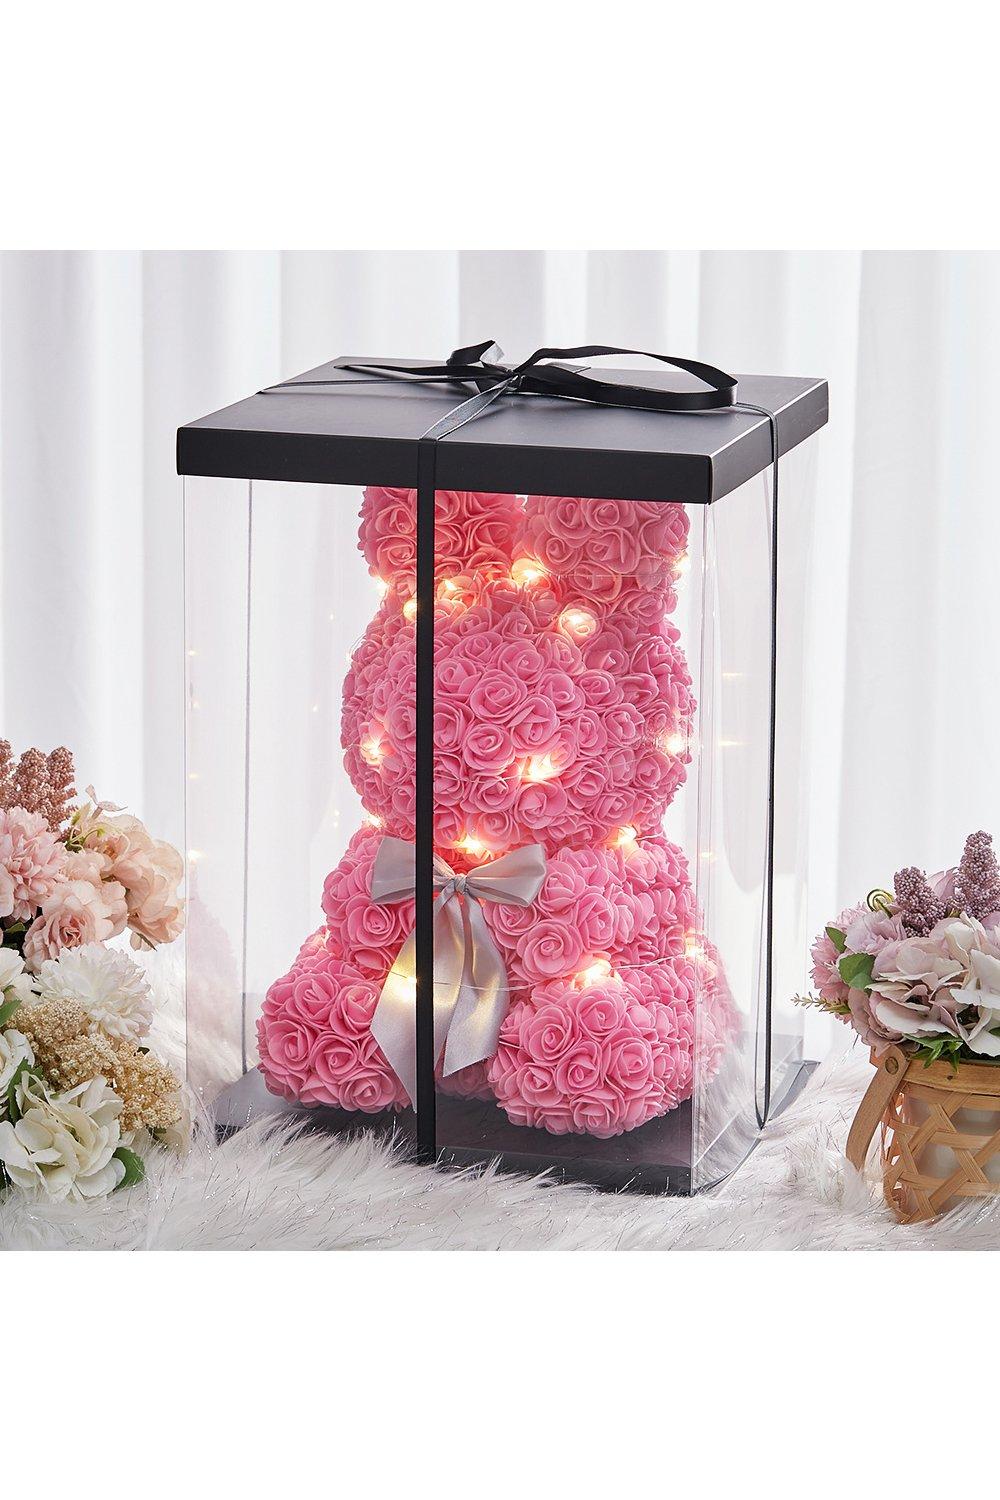 40Cm Rose Rabbit Gift Box with LED Lights for Valentine's Day